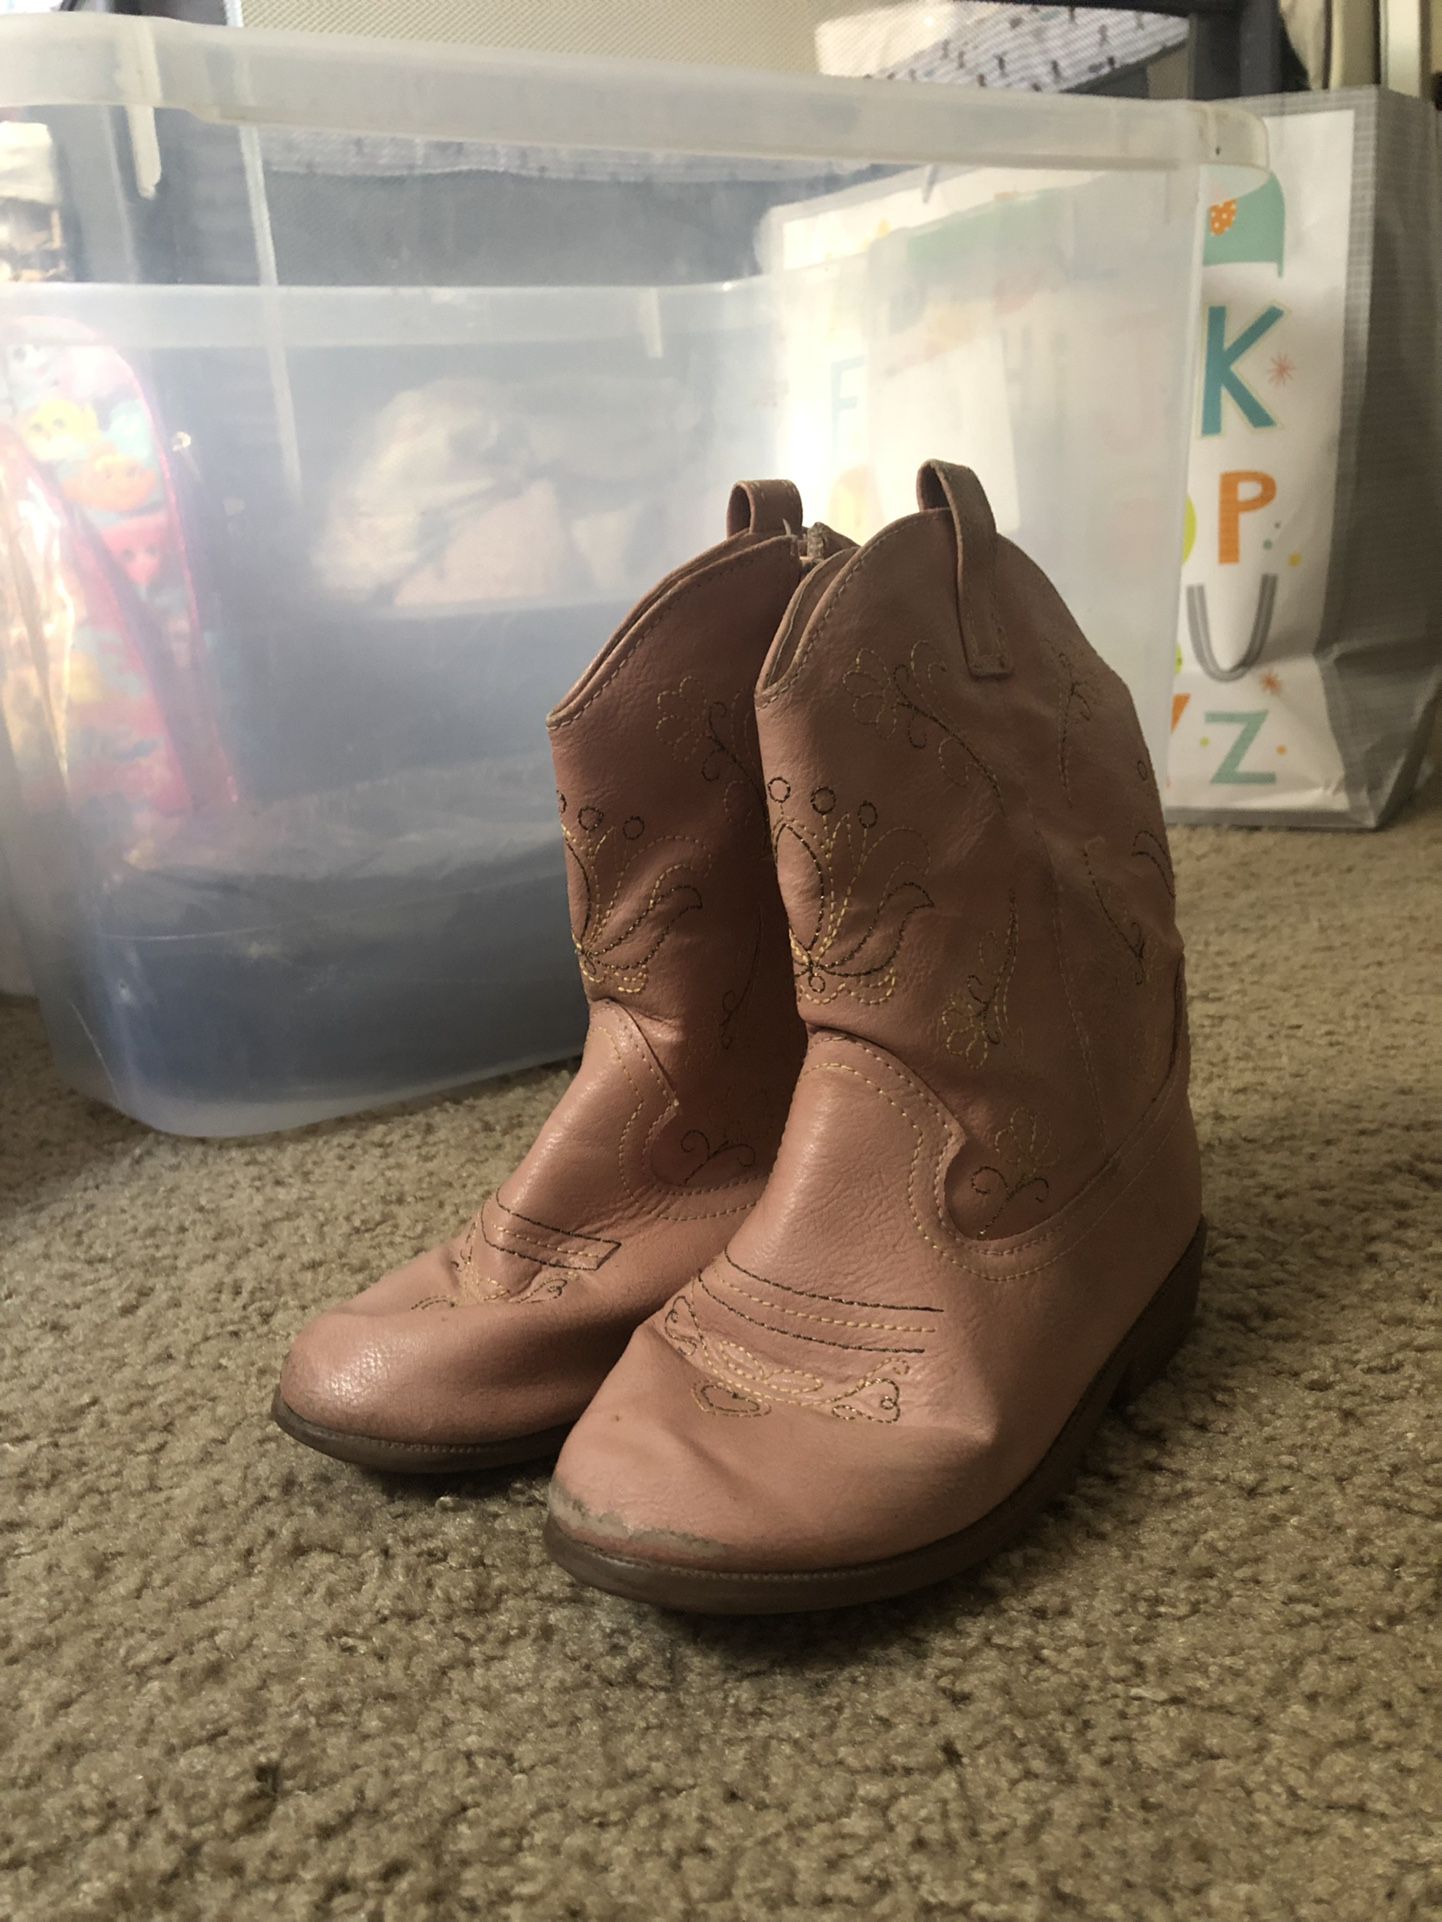 Lv Kids Boots - Pink